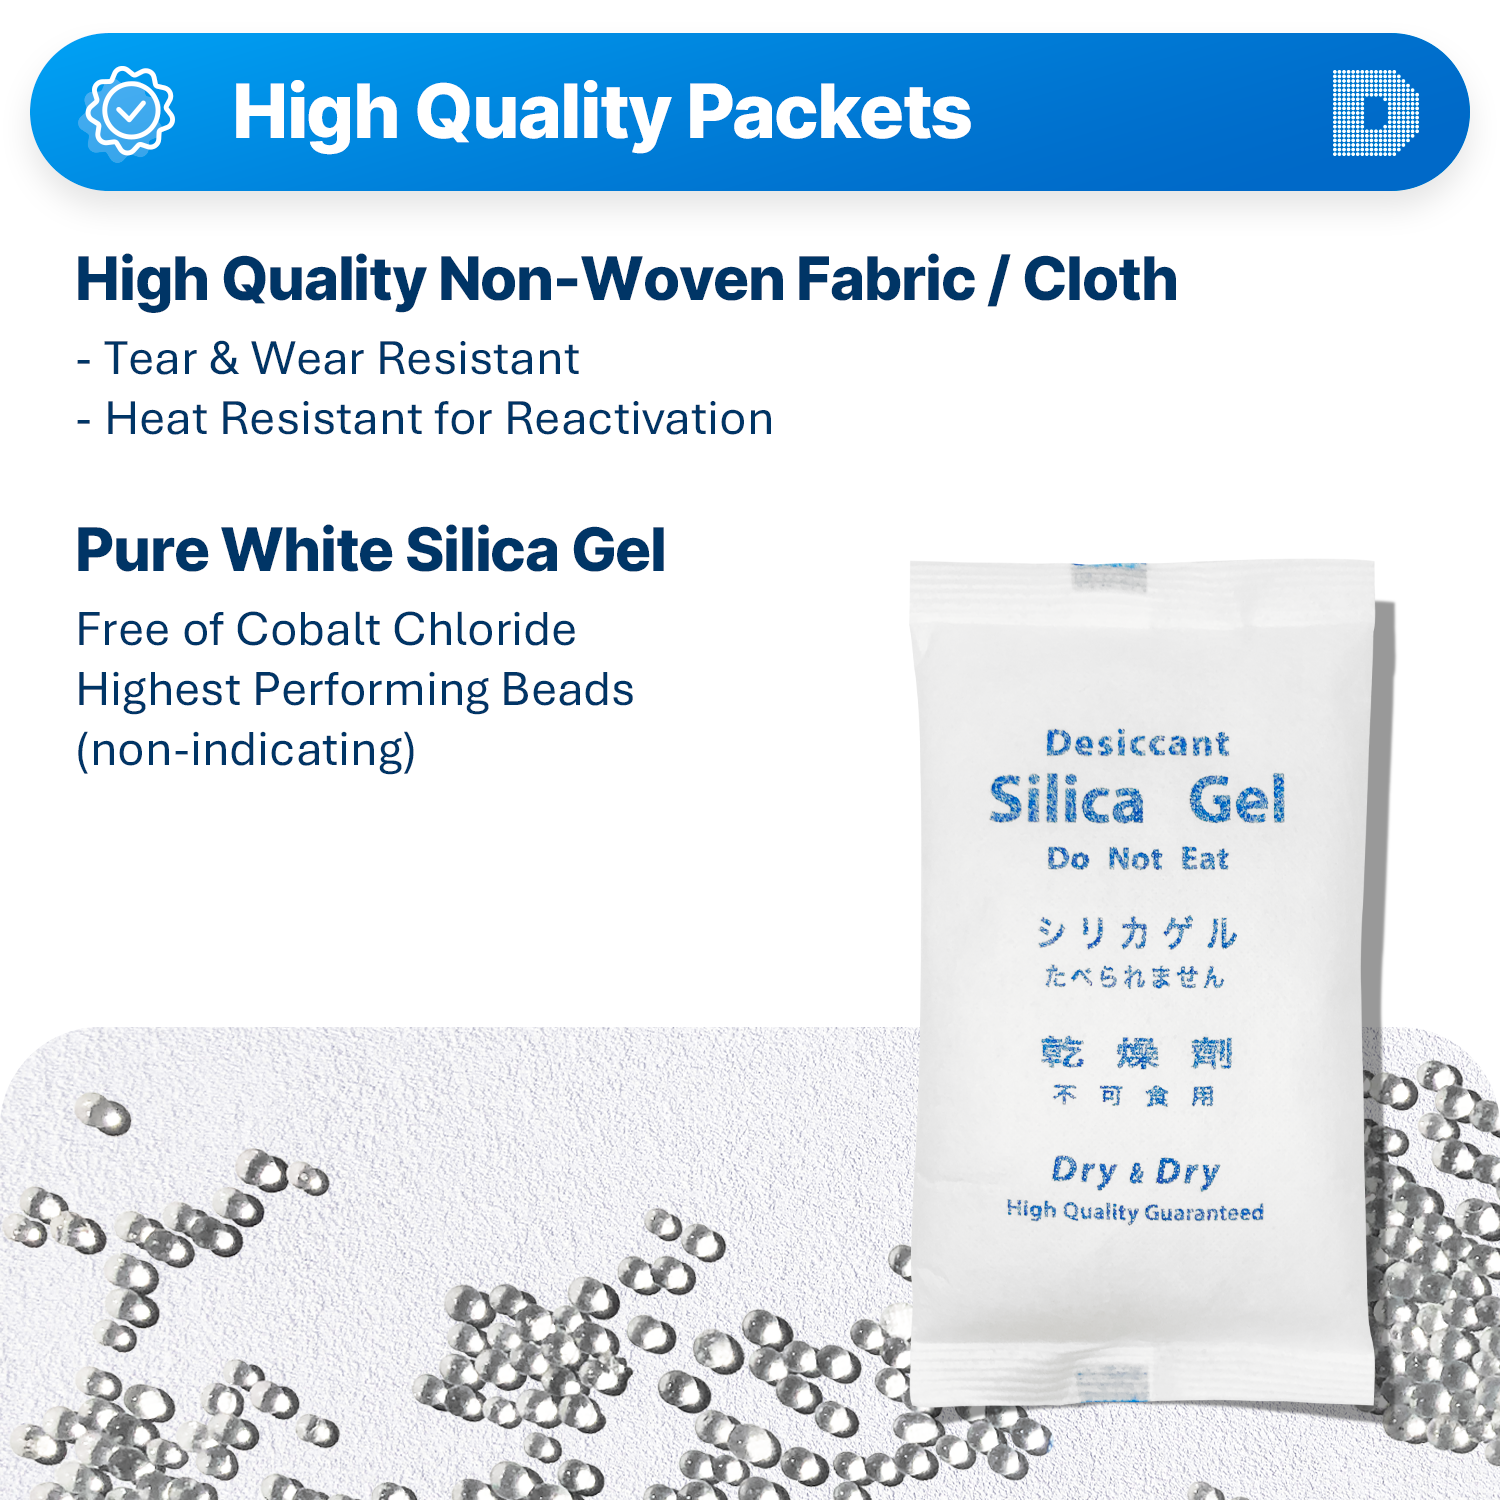 500 Gram Non-Woven Fabric(Cloth) Packets